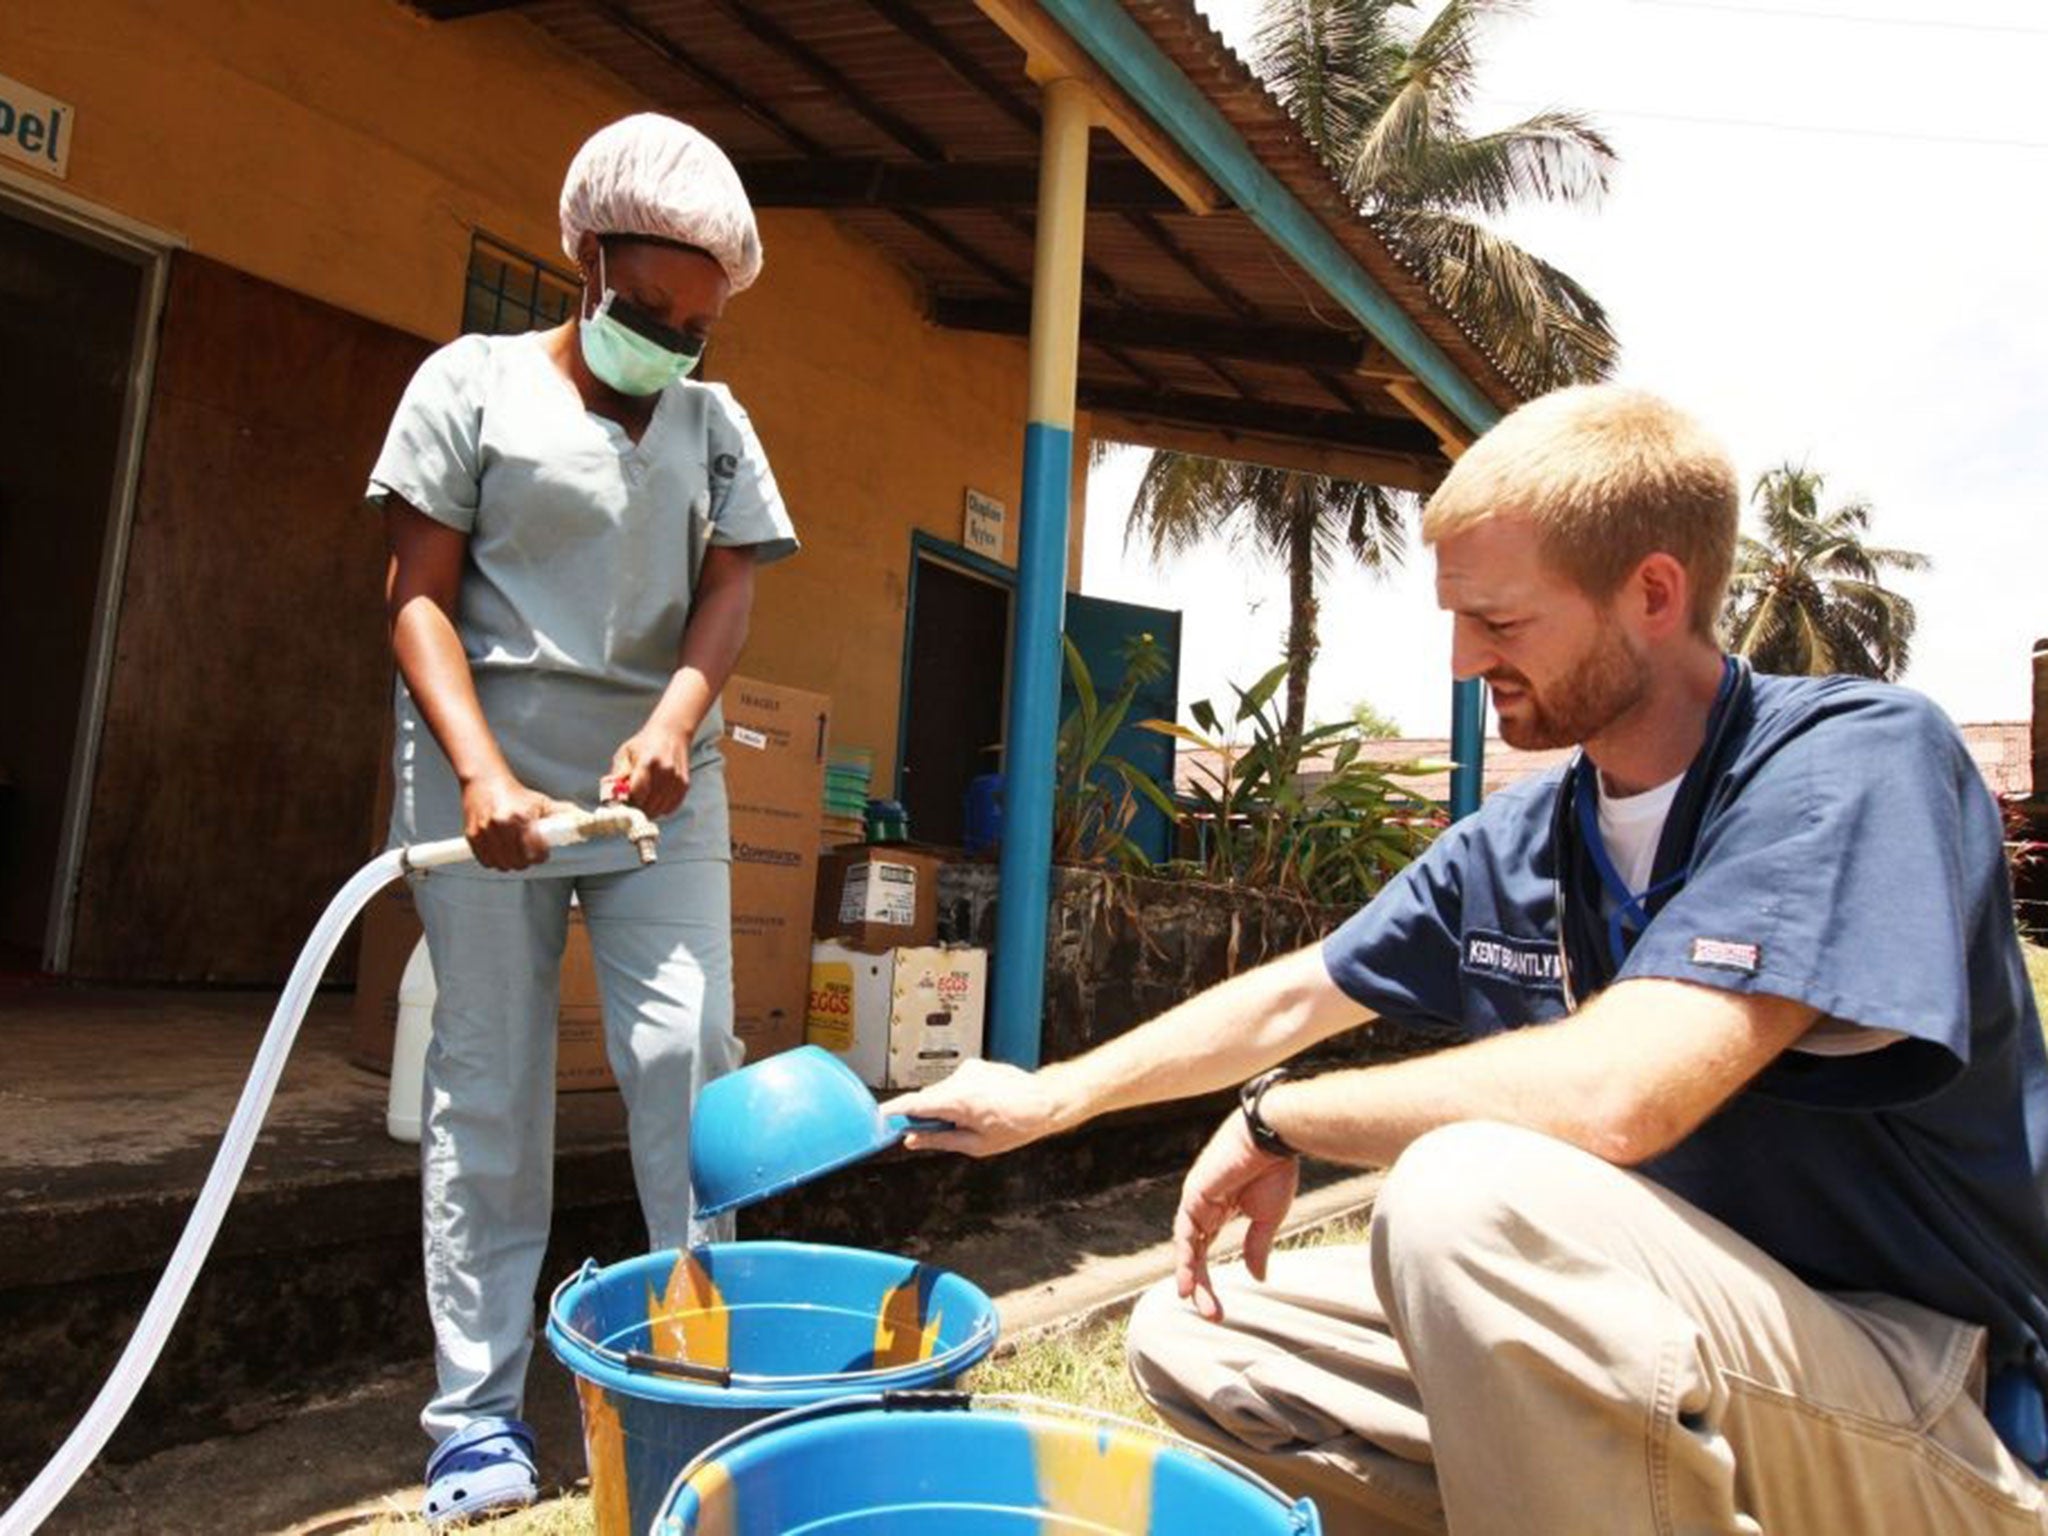 An aid worker helps with the measuring out the disinfectant